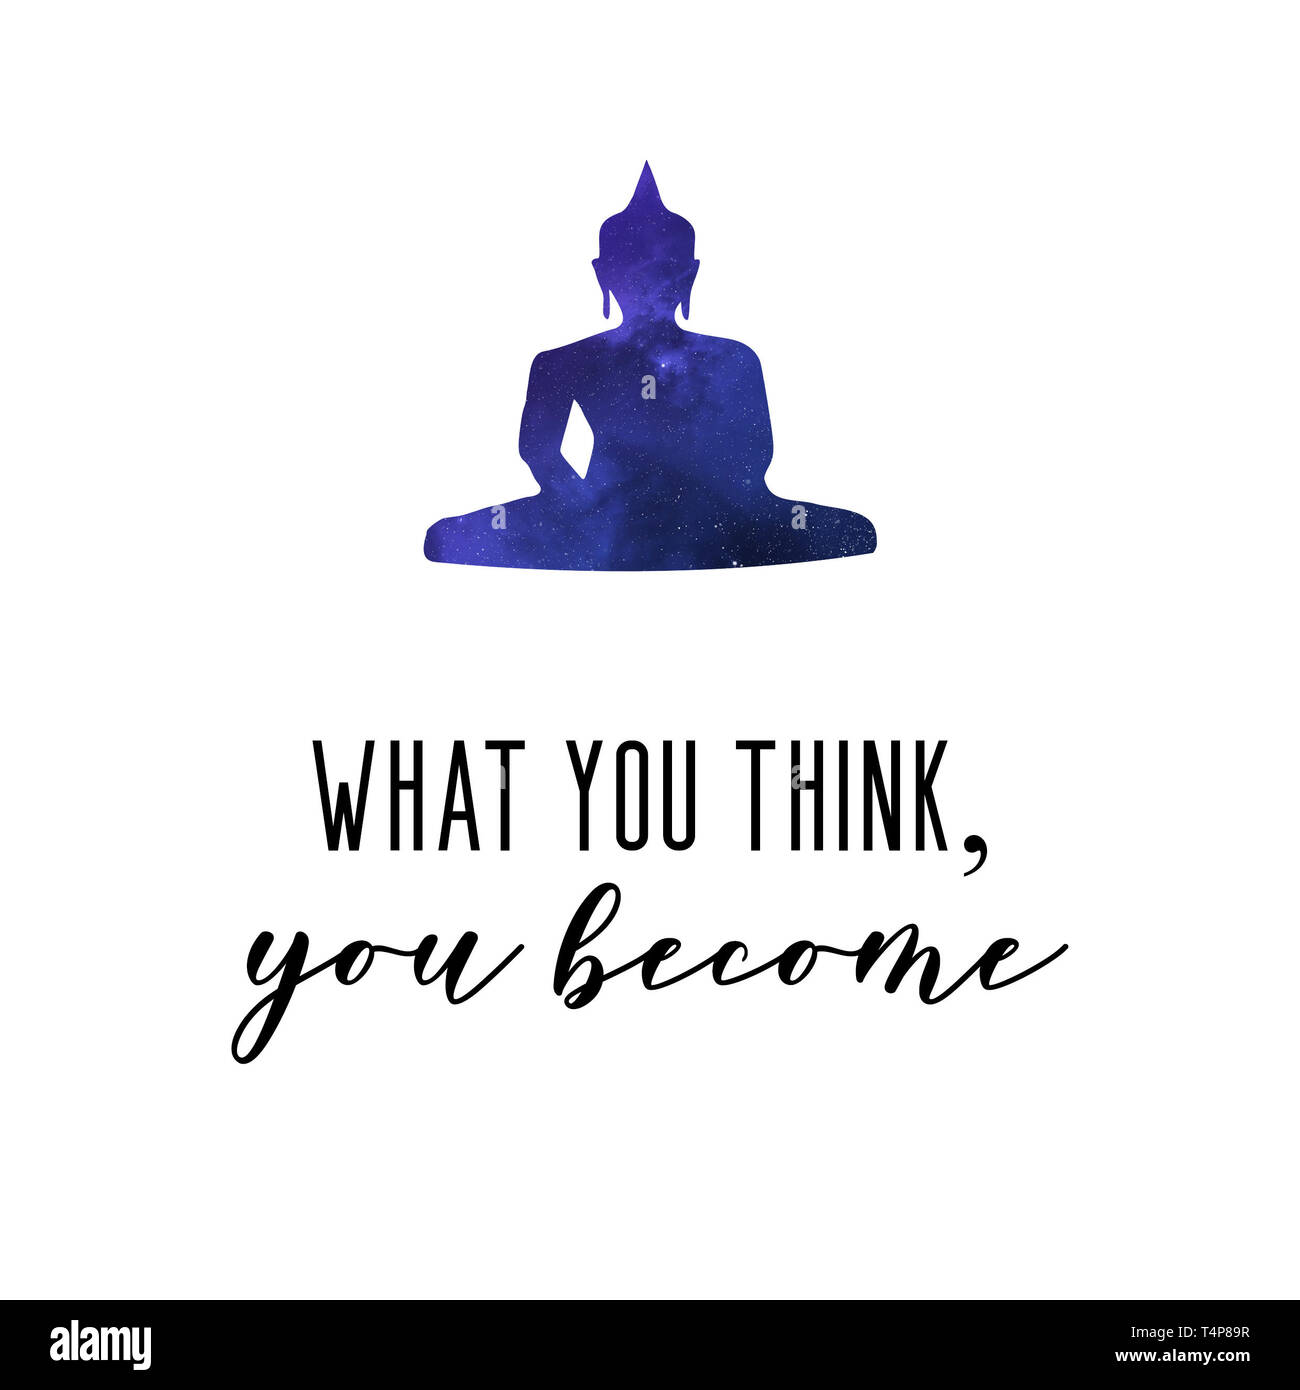 What you think, you become. Buddha spiritual quote with buddha silhouette in blue watercolor. Stock Photo